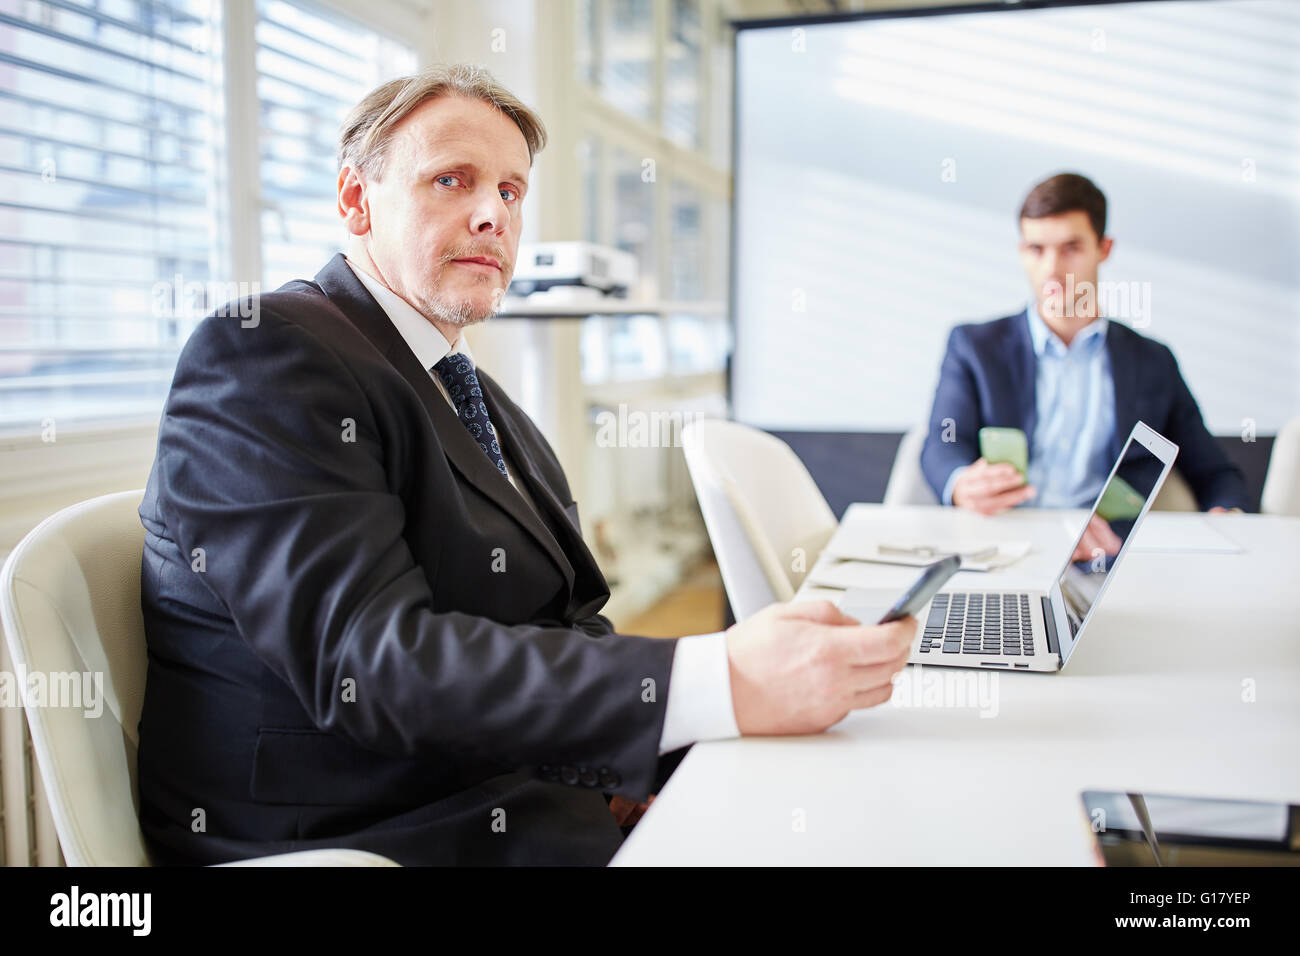 Business consulting man in business meeting with smartphone and computer Stock Photo